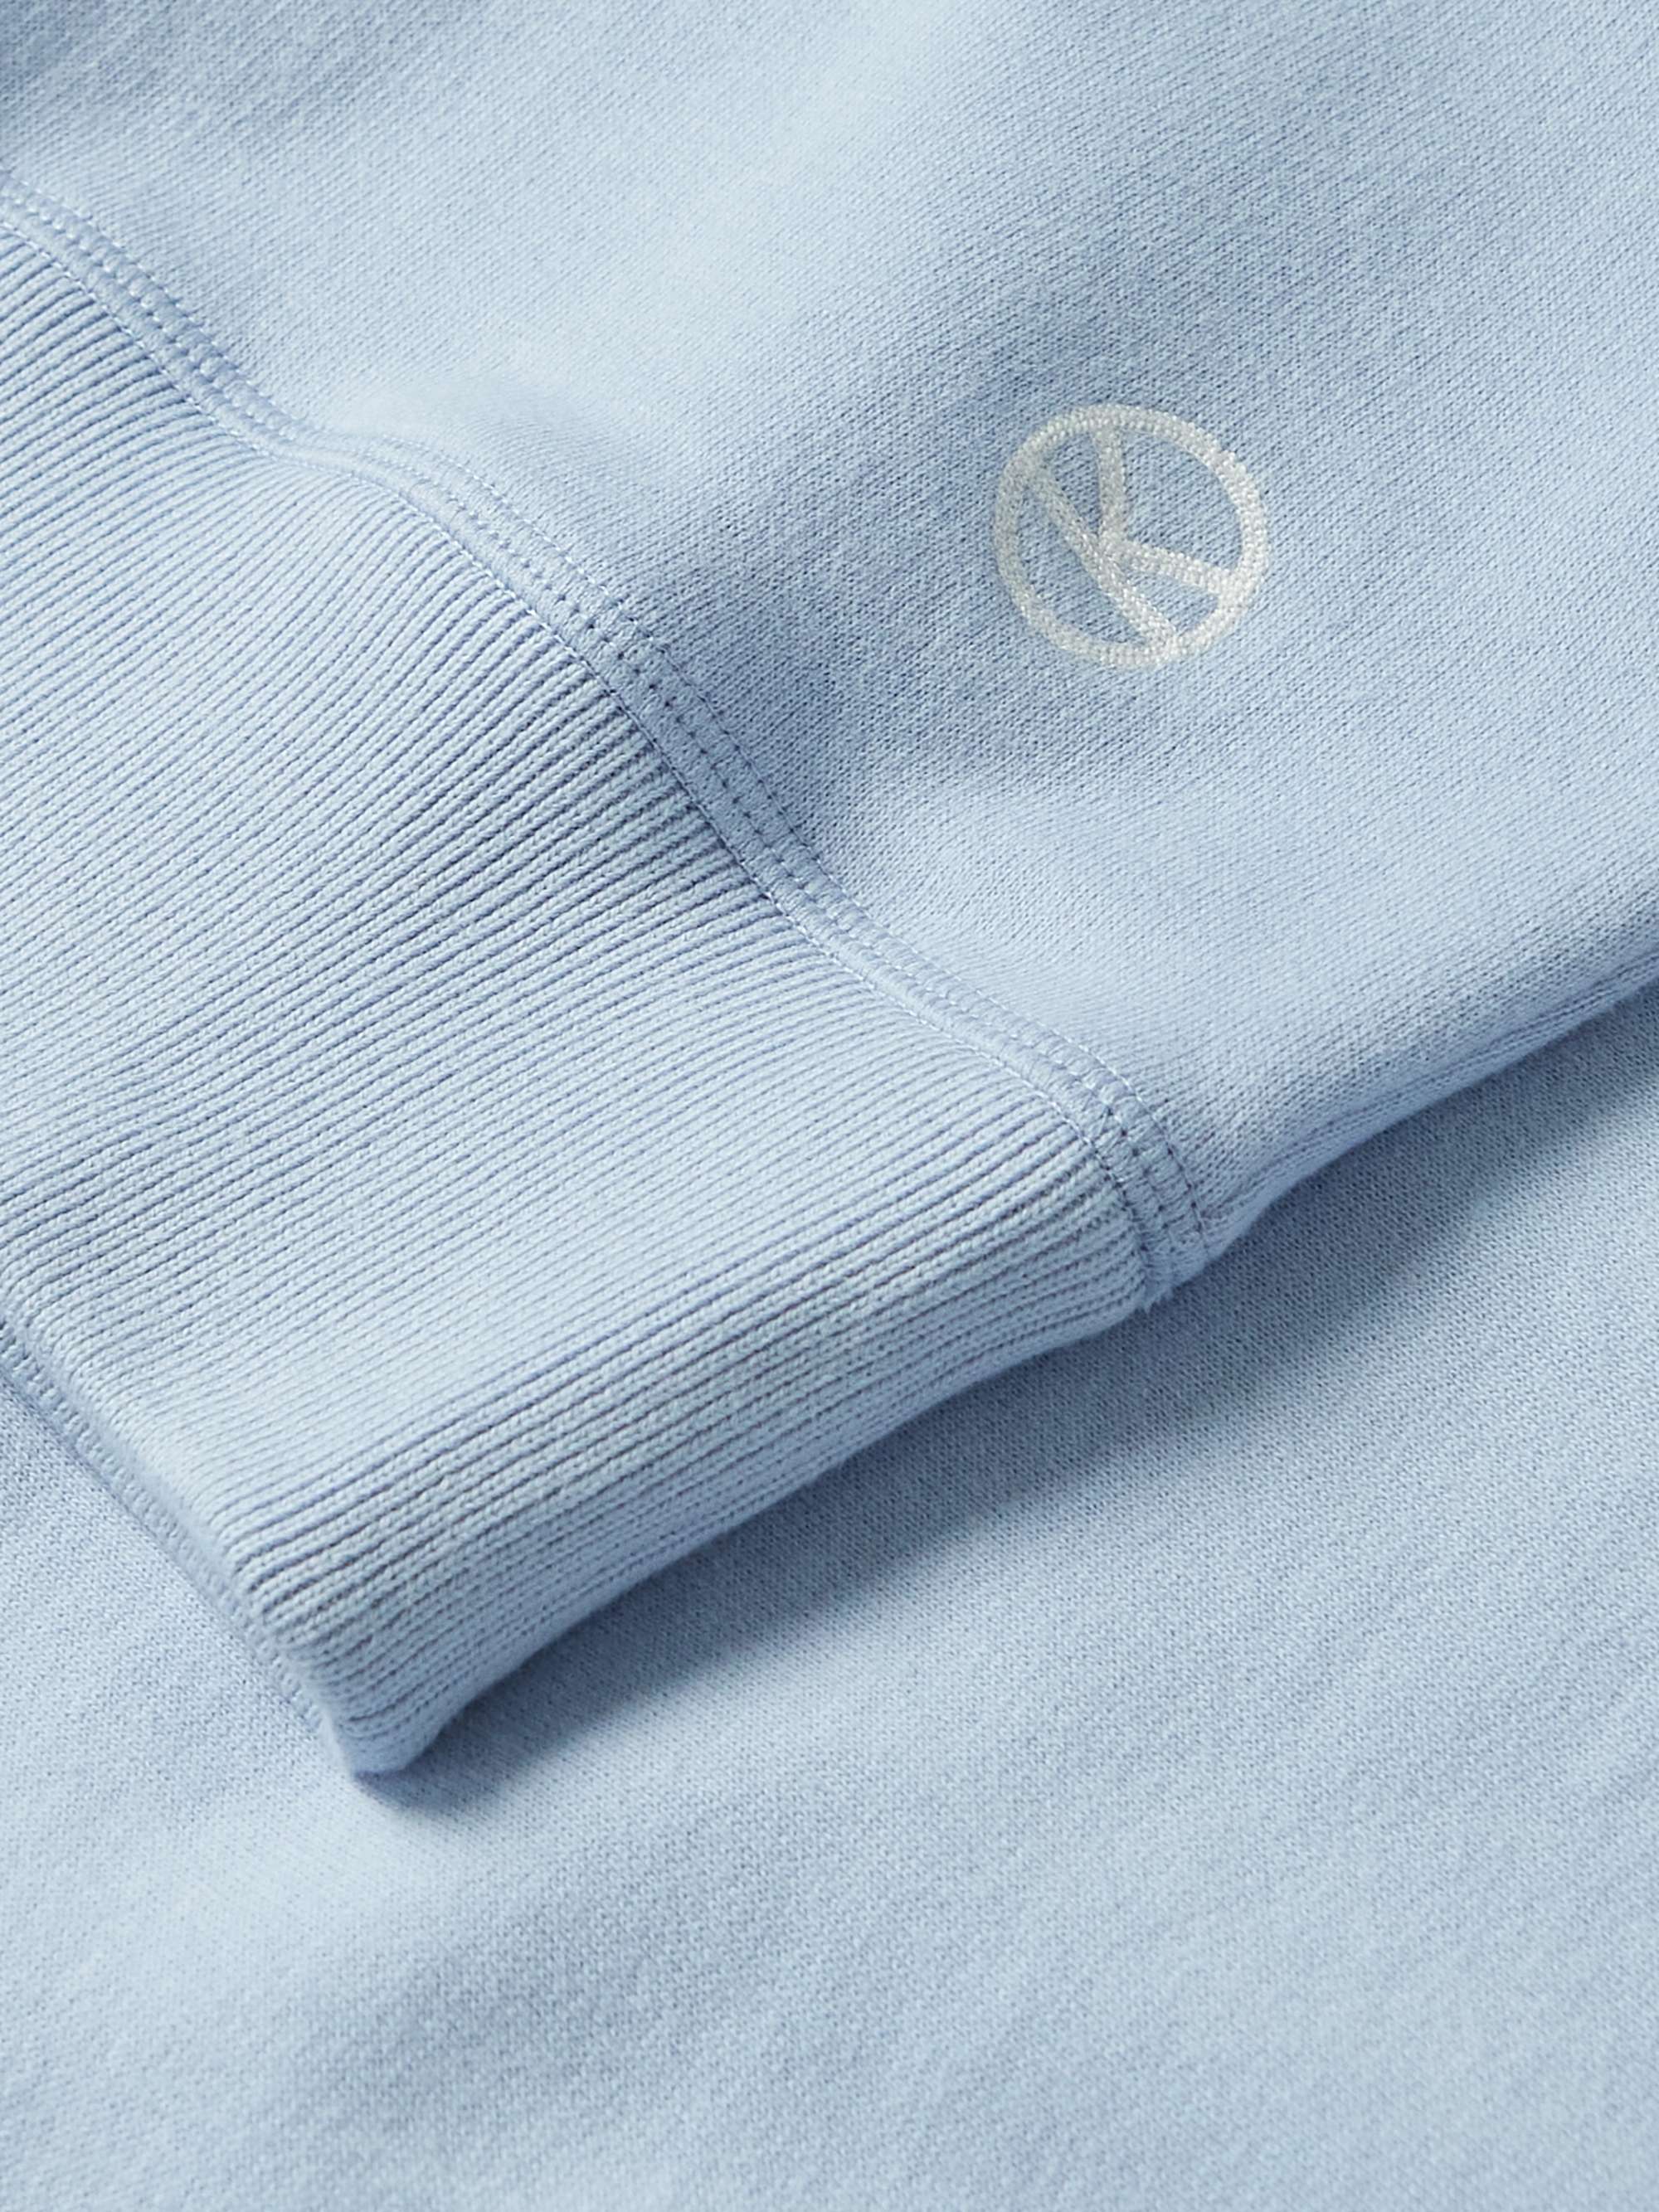 KINGSMAN Logo-Embroidered Cotton and Cashmere-Blend Jersey Sweatshirt